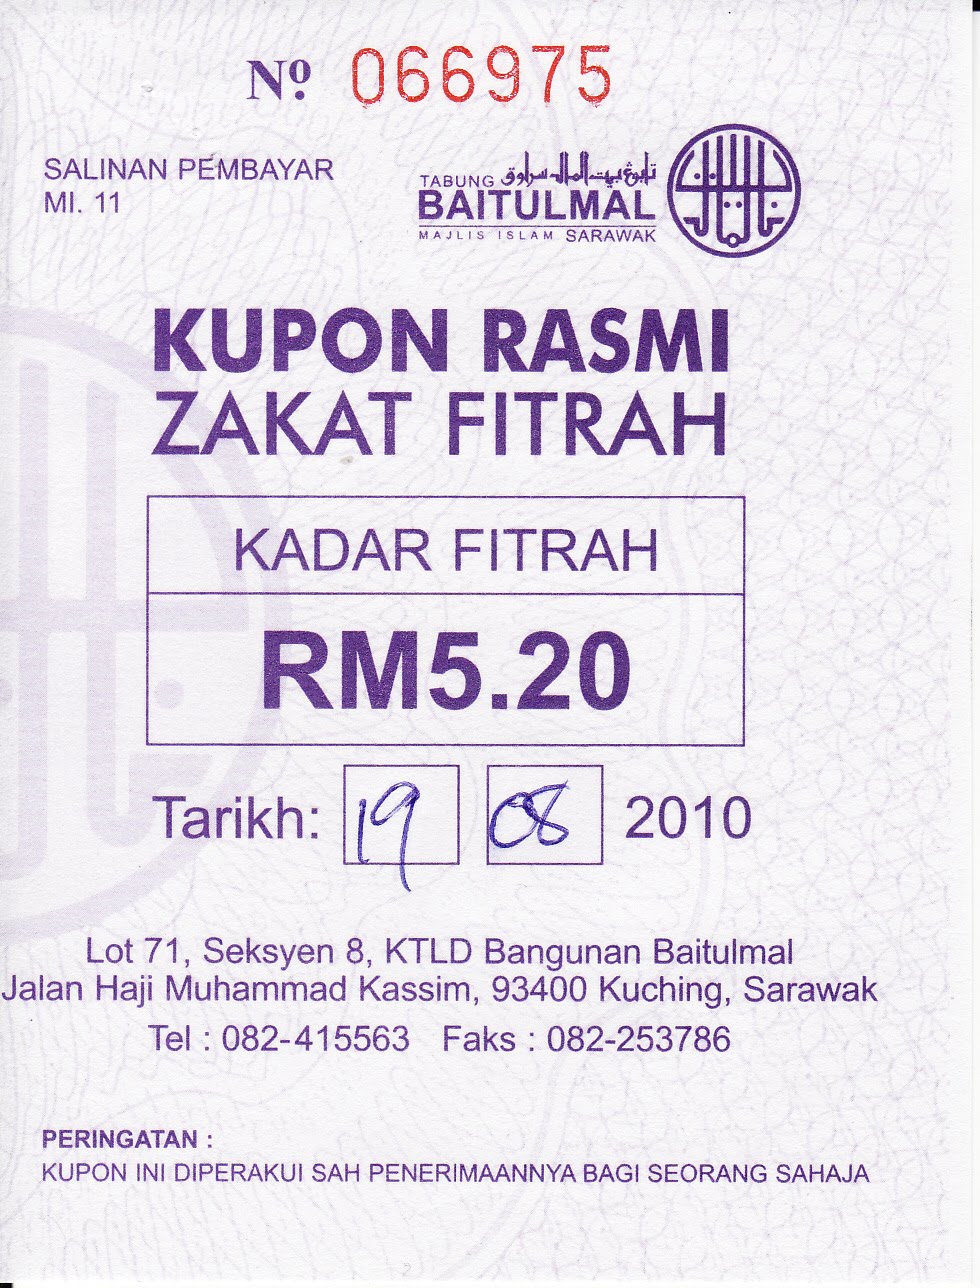 Just for you: Zakat Fitrah